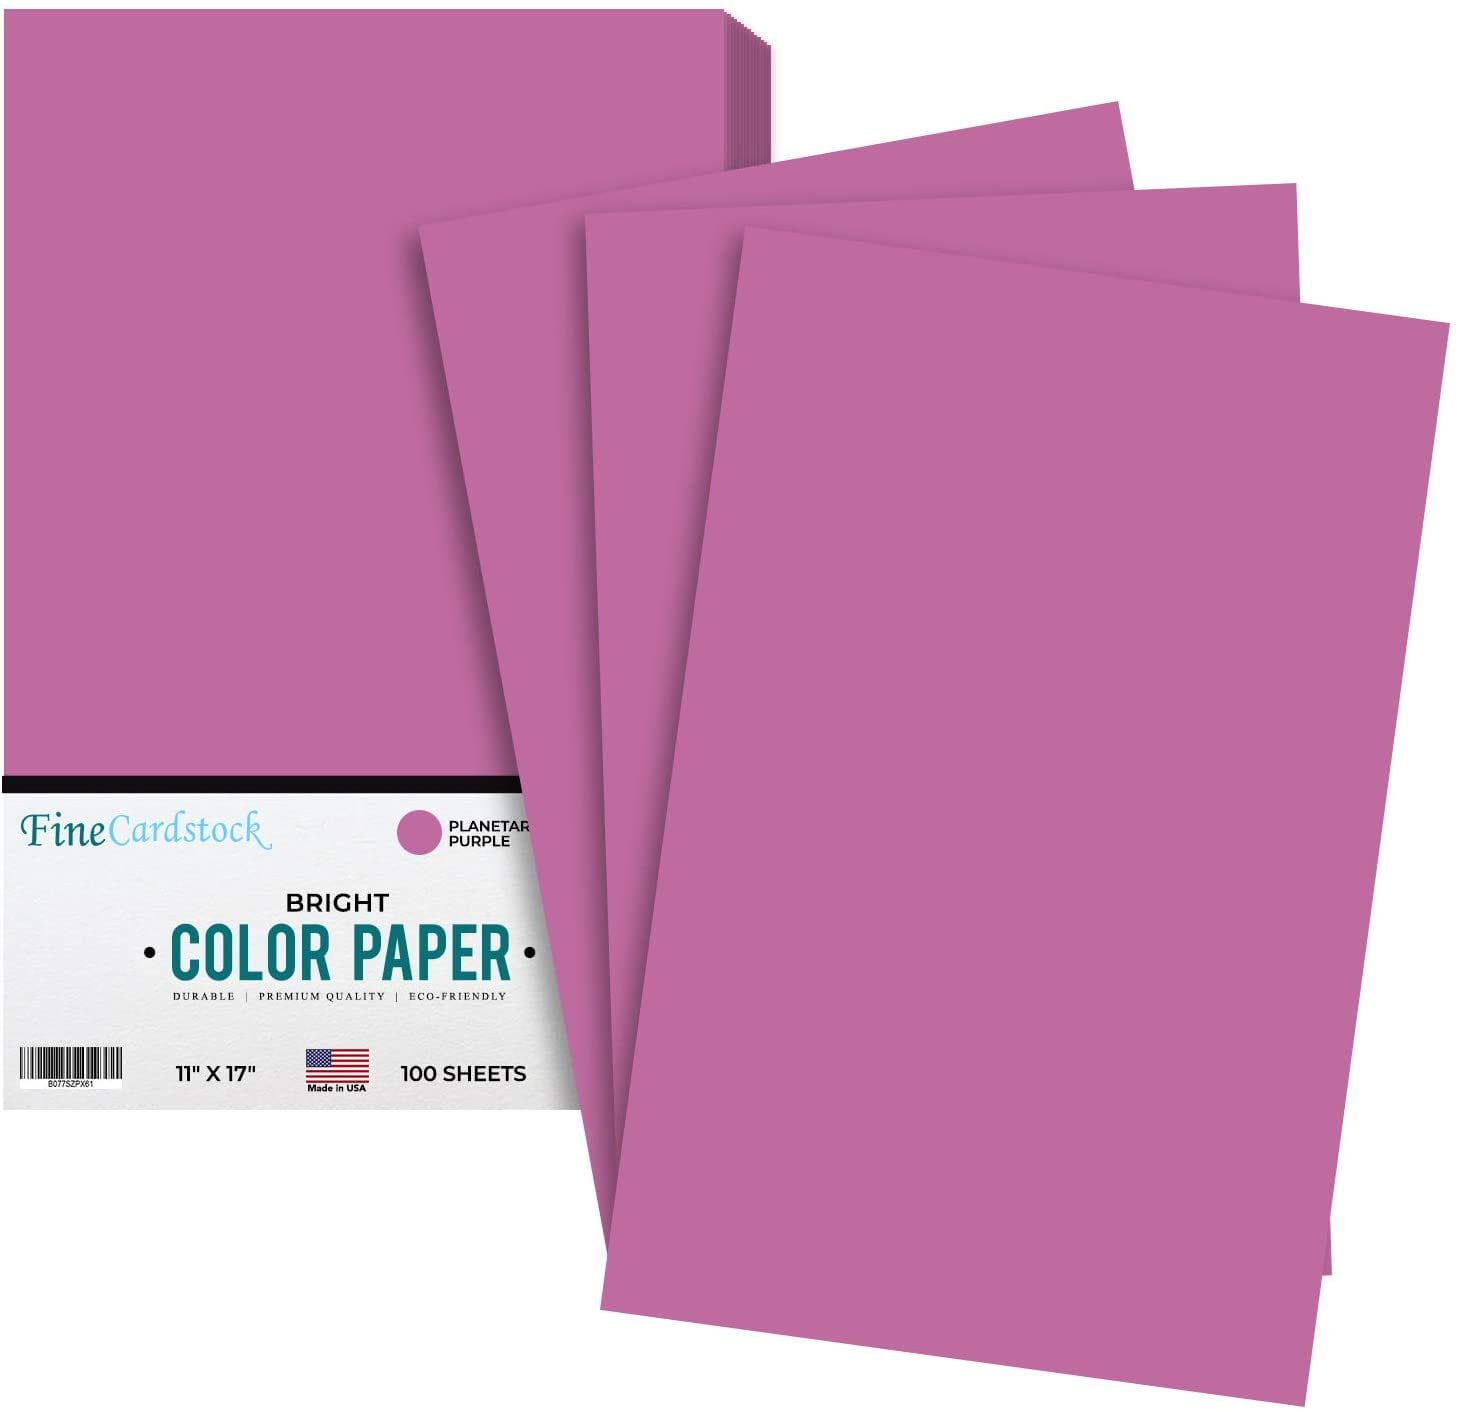 Premium Smooth Color Paper | for School Office & Home Supplies, Holiday ...